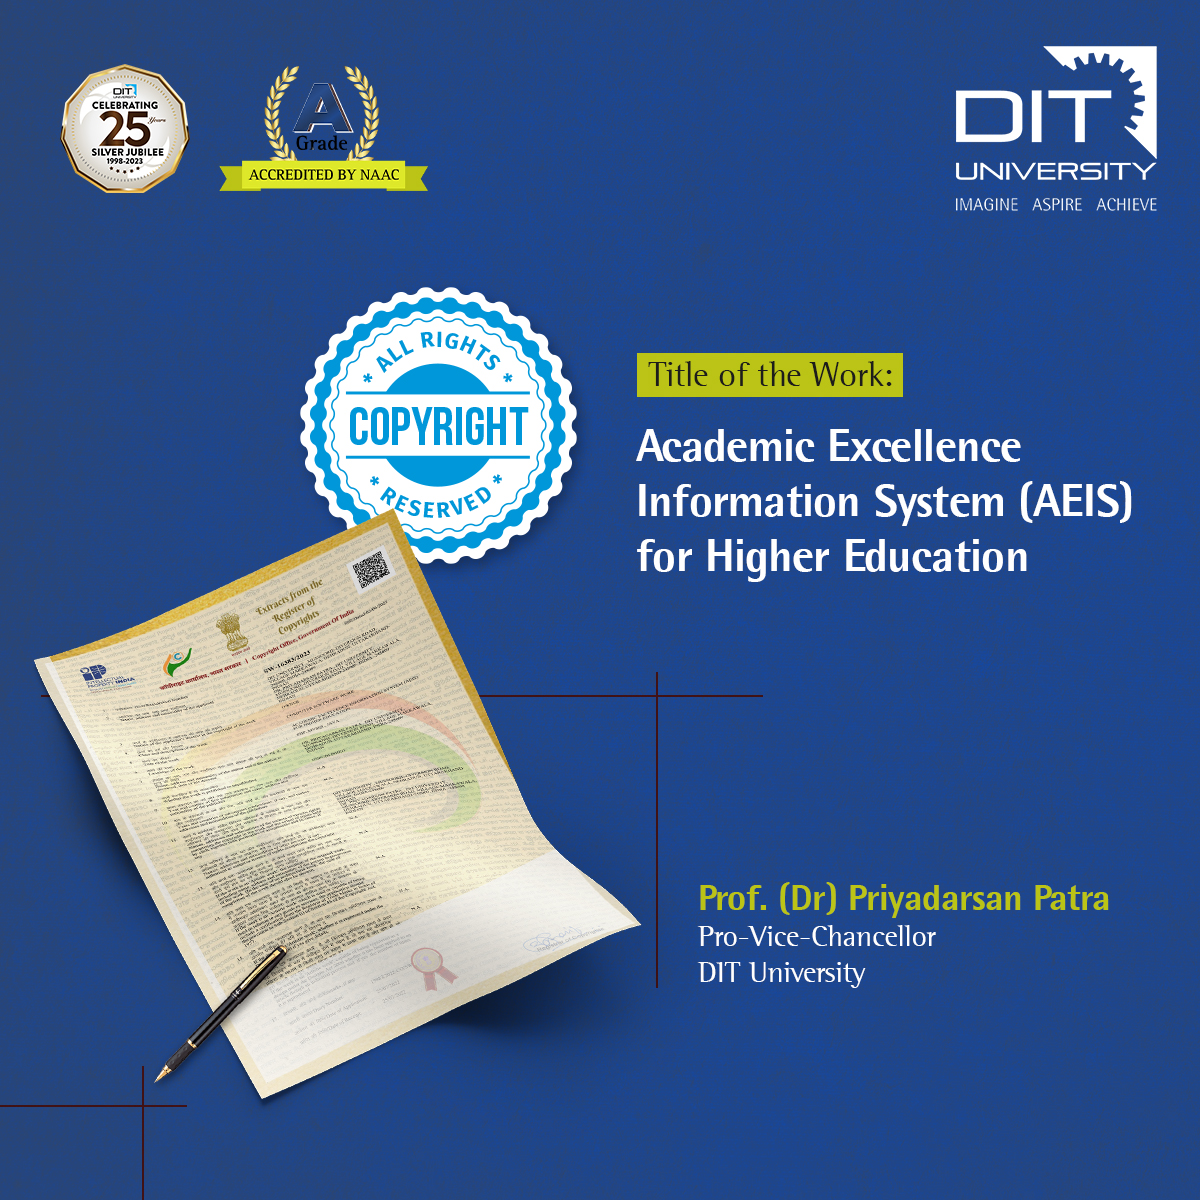 ACADEMIC EXCELLENCE INFORMATION SYSTEM (AEIS) FOR HIGHER EDUCATION